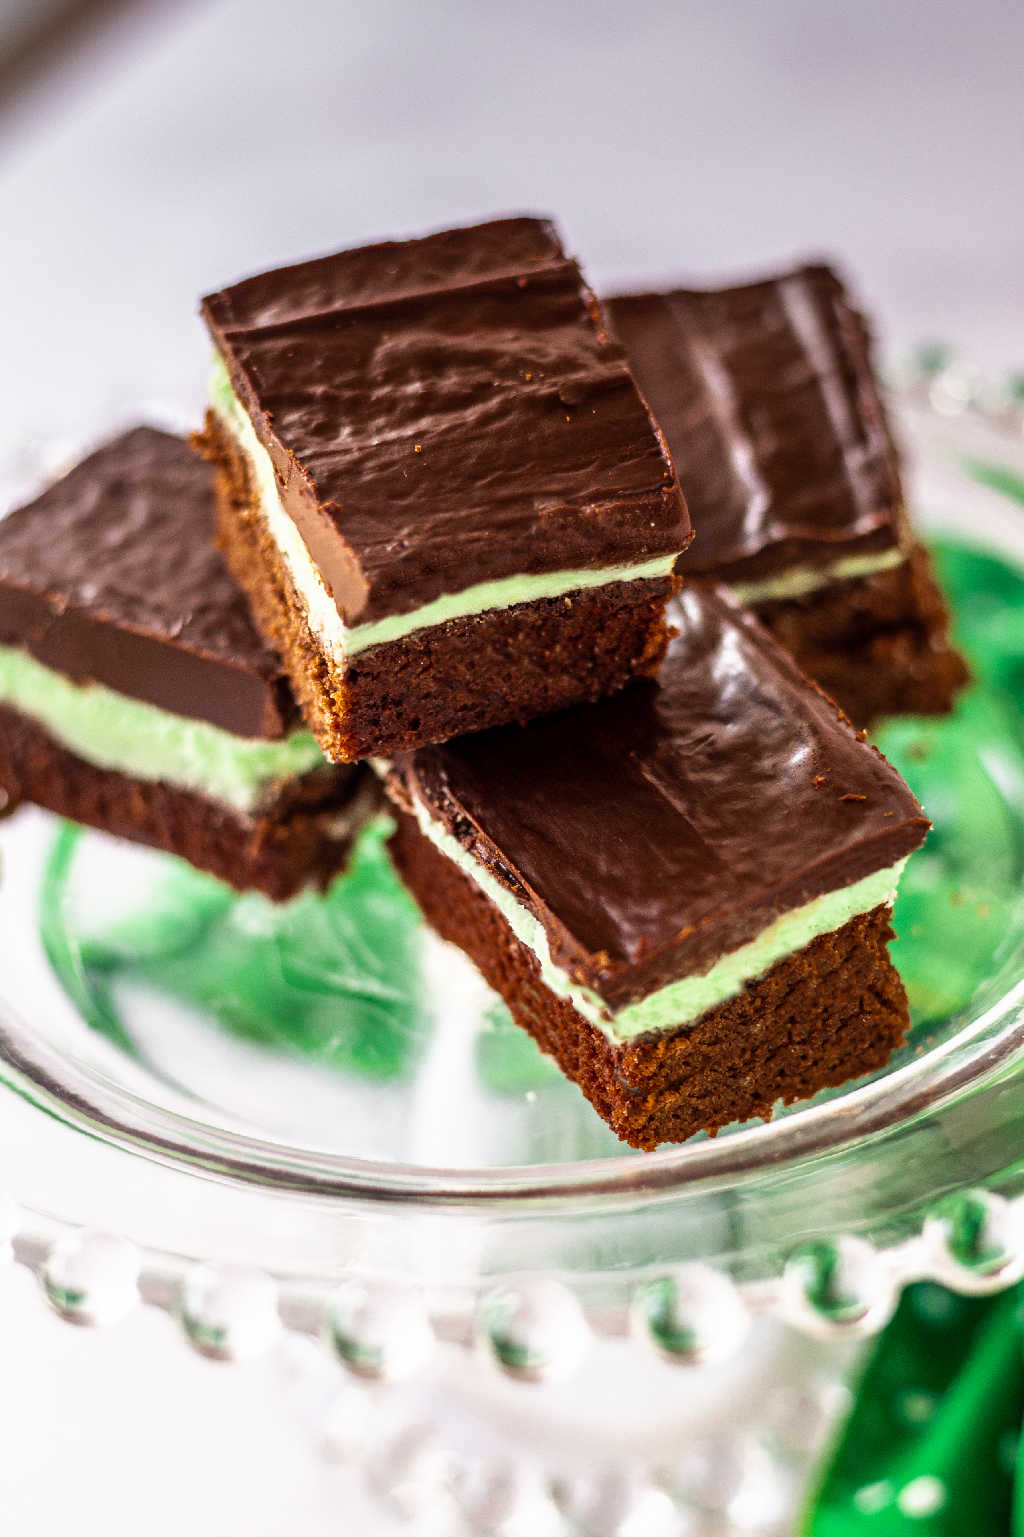 fudge mint brownies on a pedestal plate with a sprig of mint.